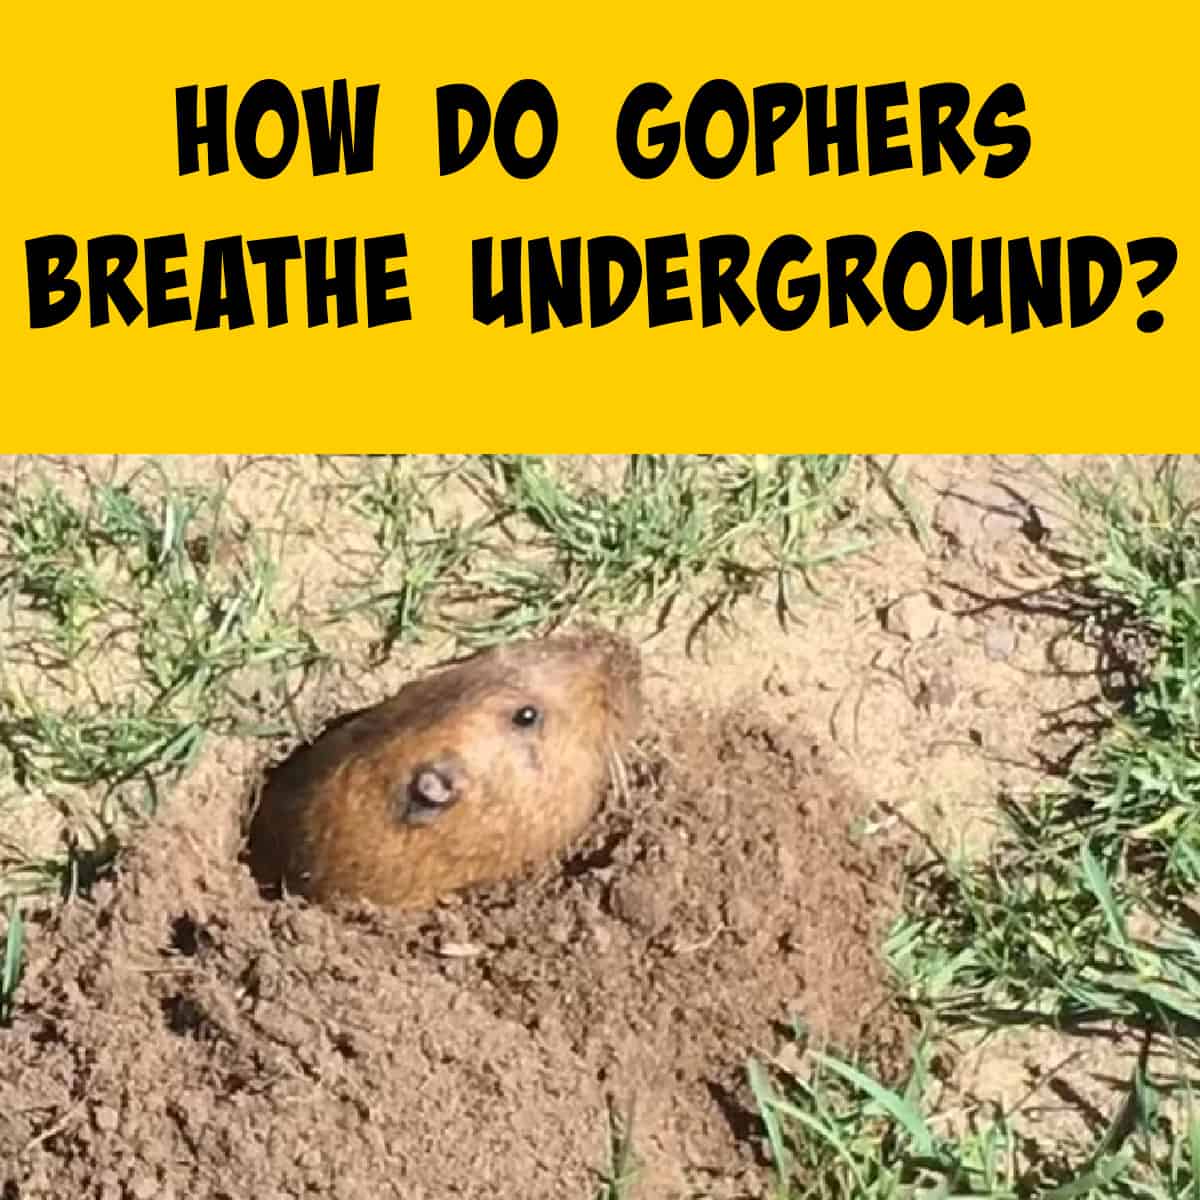 Gopher sticking its head out of a burrow